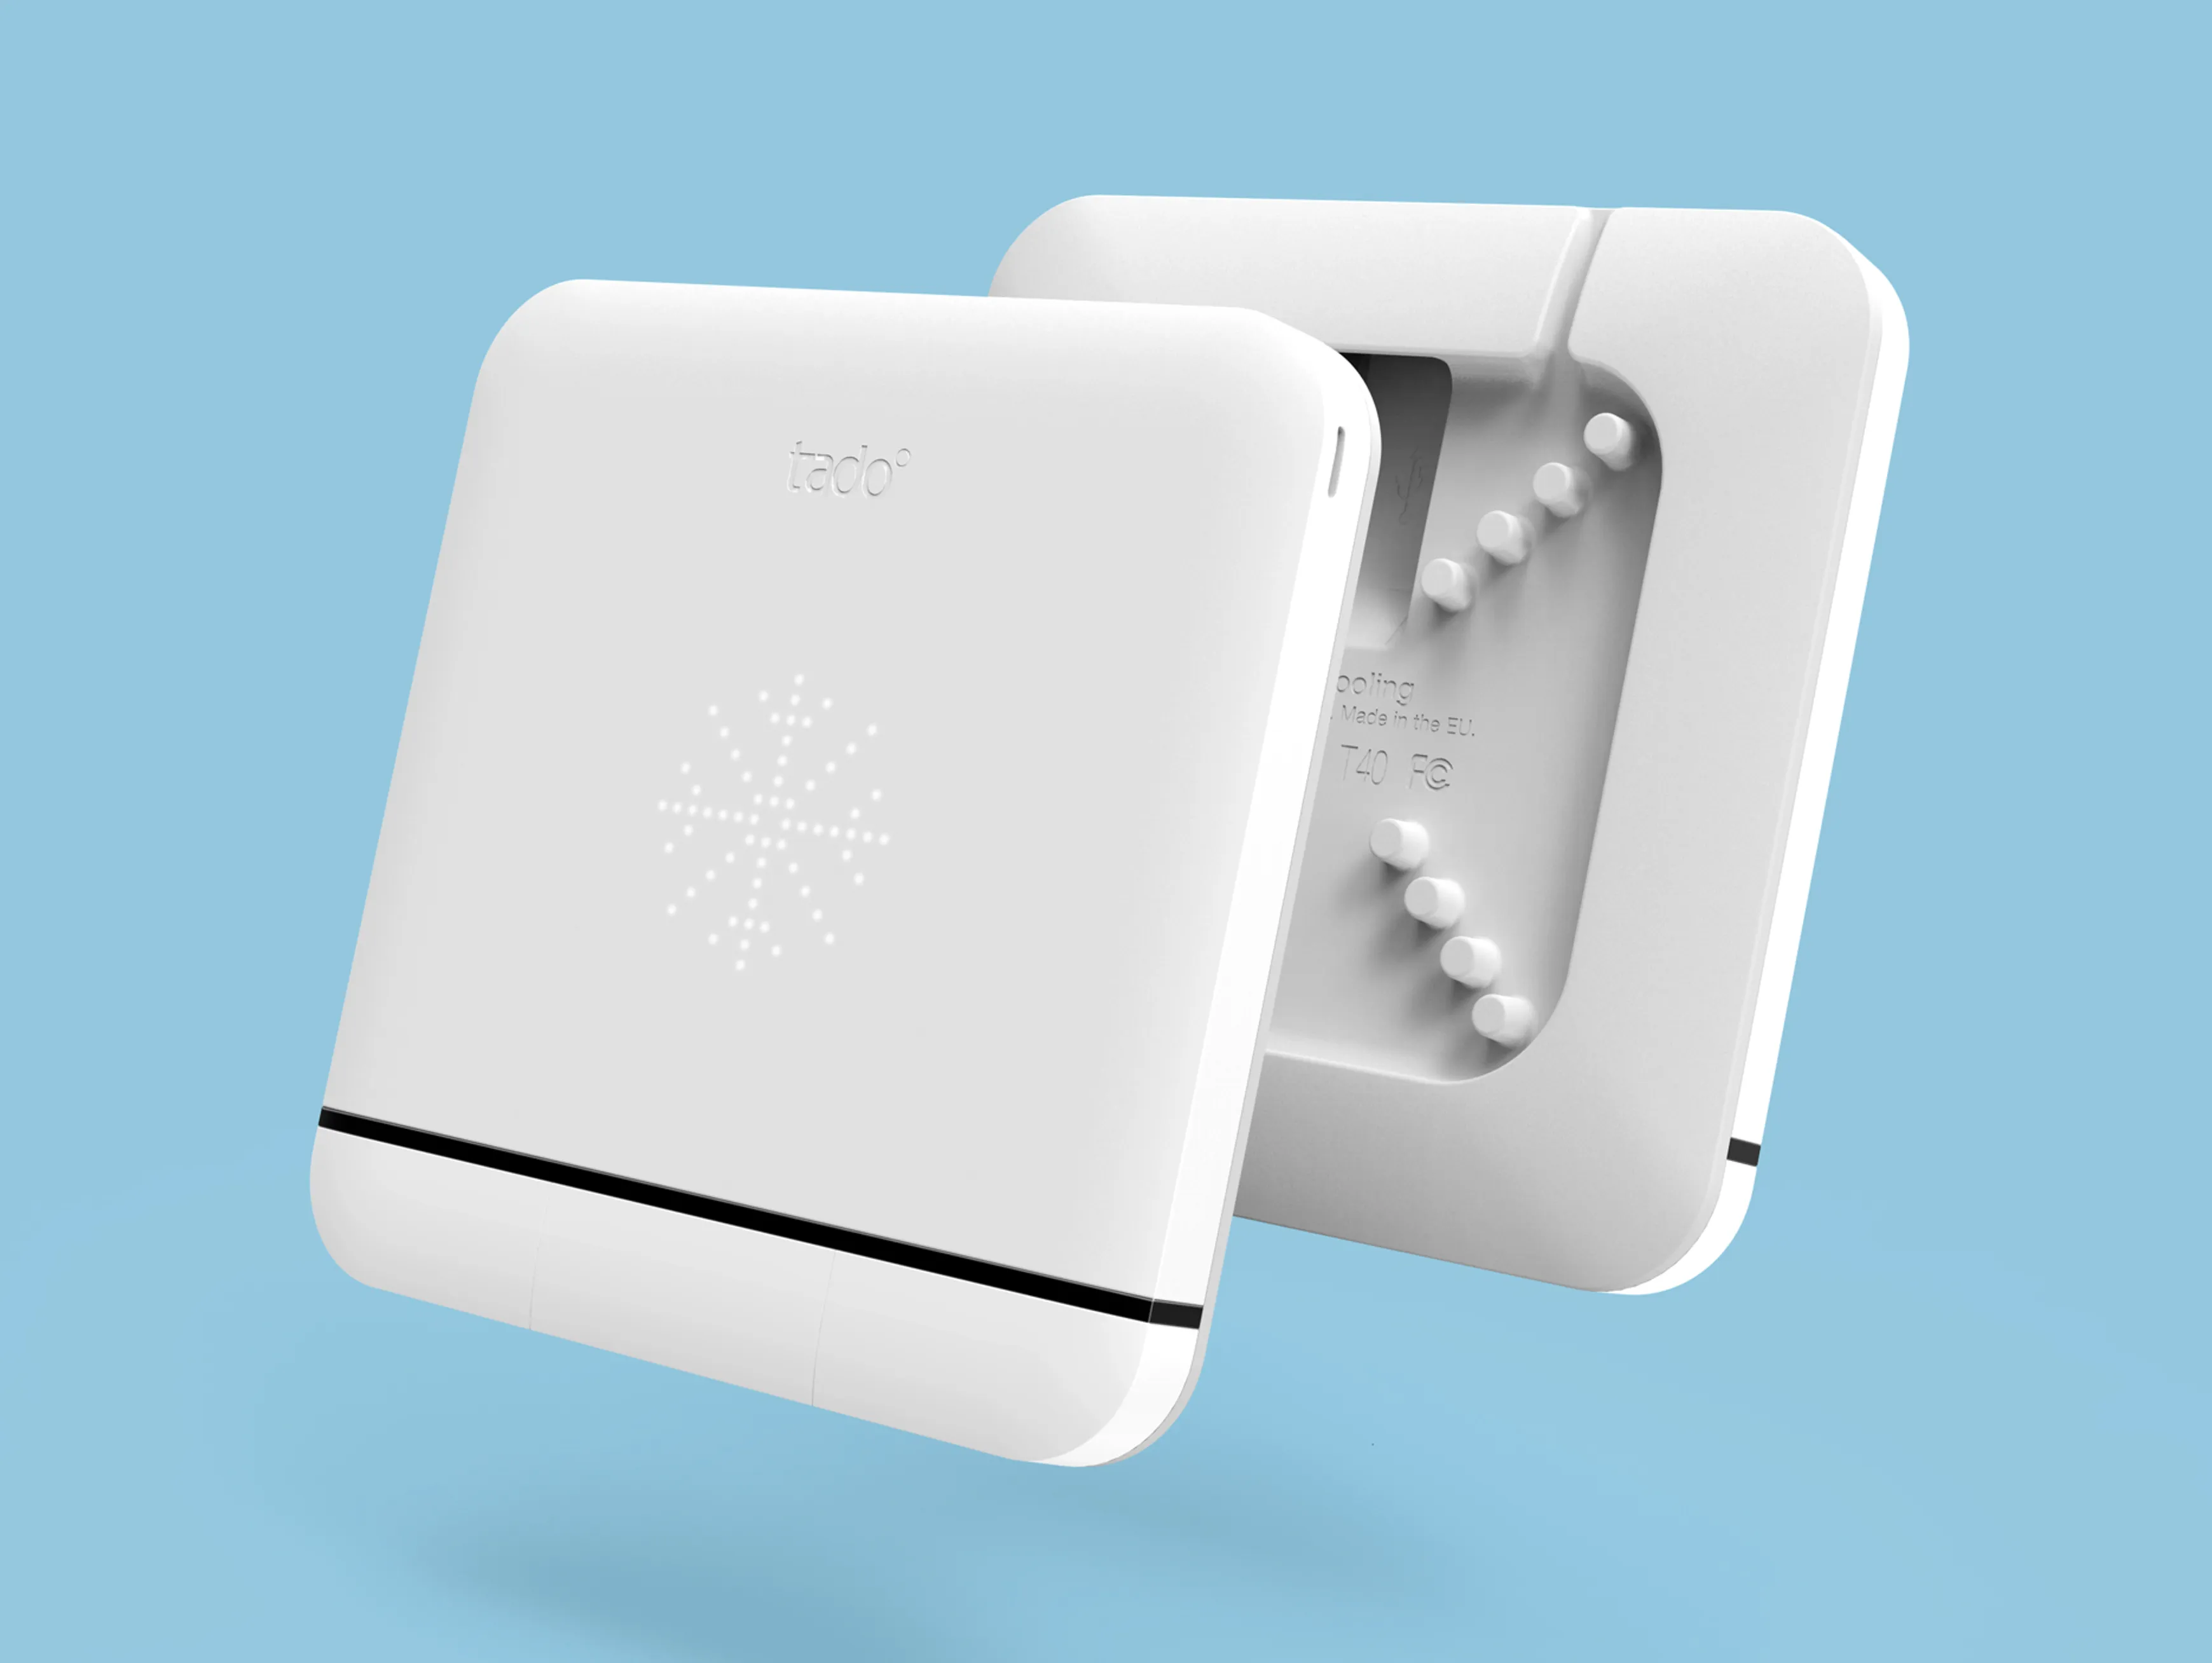 Two tado smart AC controls floating back to back in front of a blue background